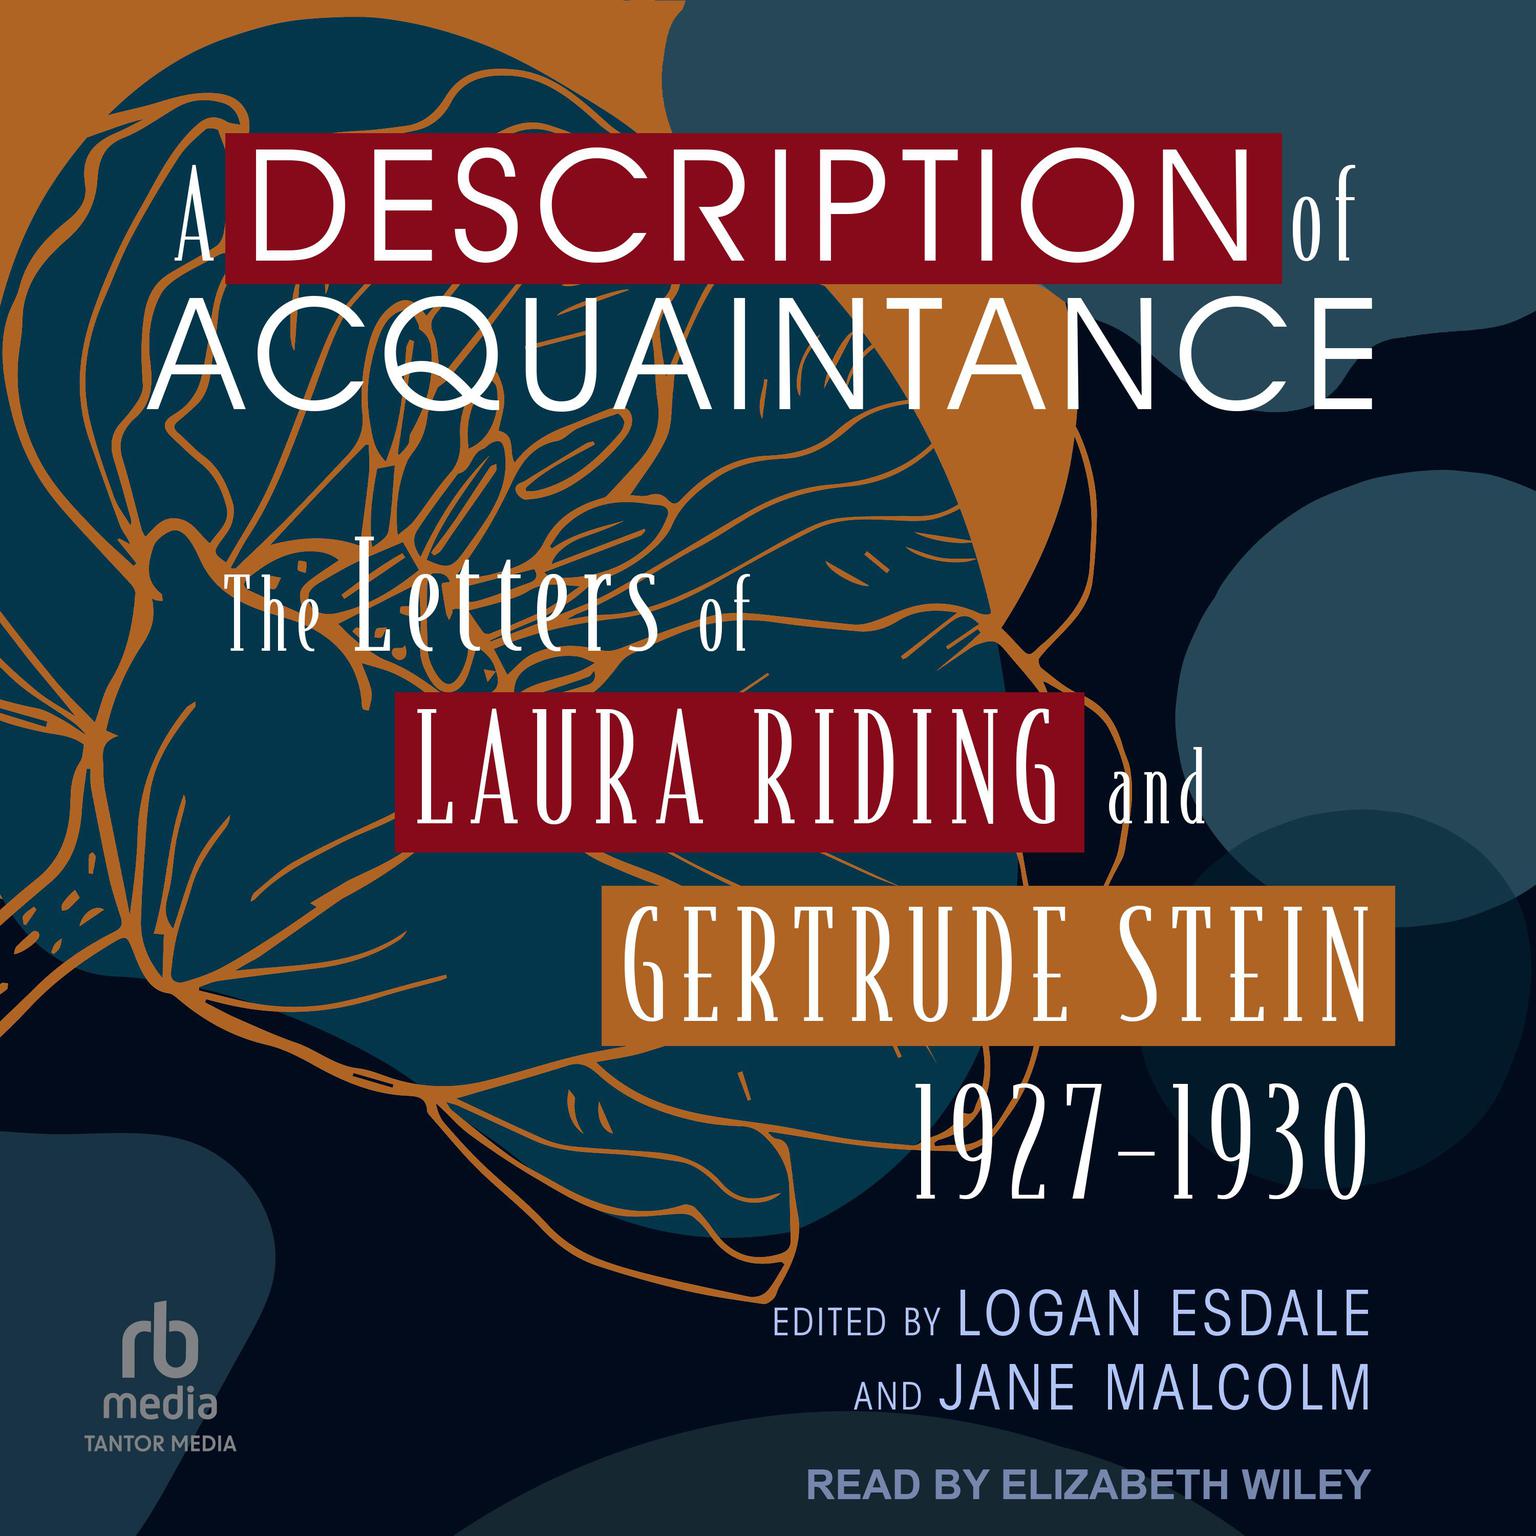 A Description of Acquaintance: The Letters of Laura Riding and Gertrude Stein, 1927-1930 Audiobook, by Jane Malcolm